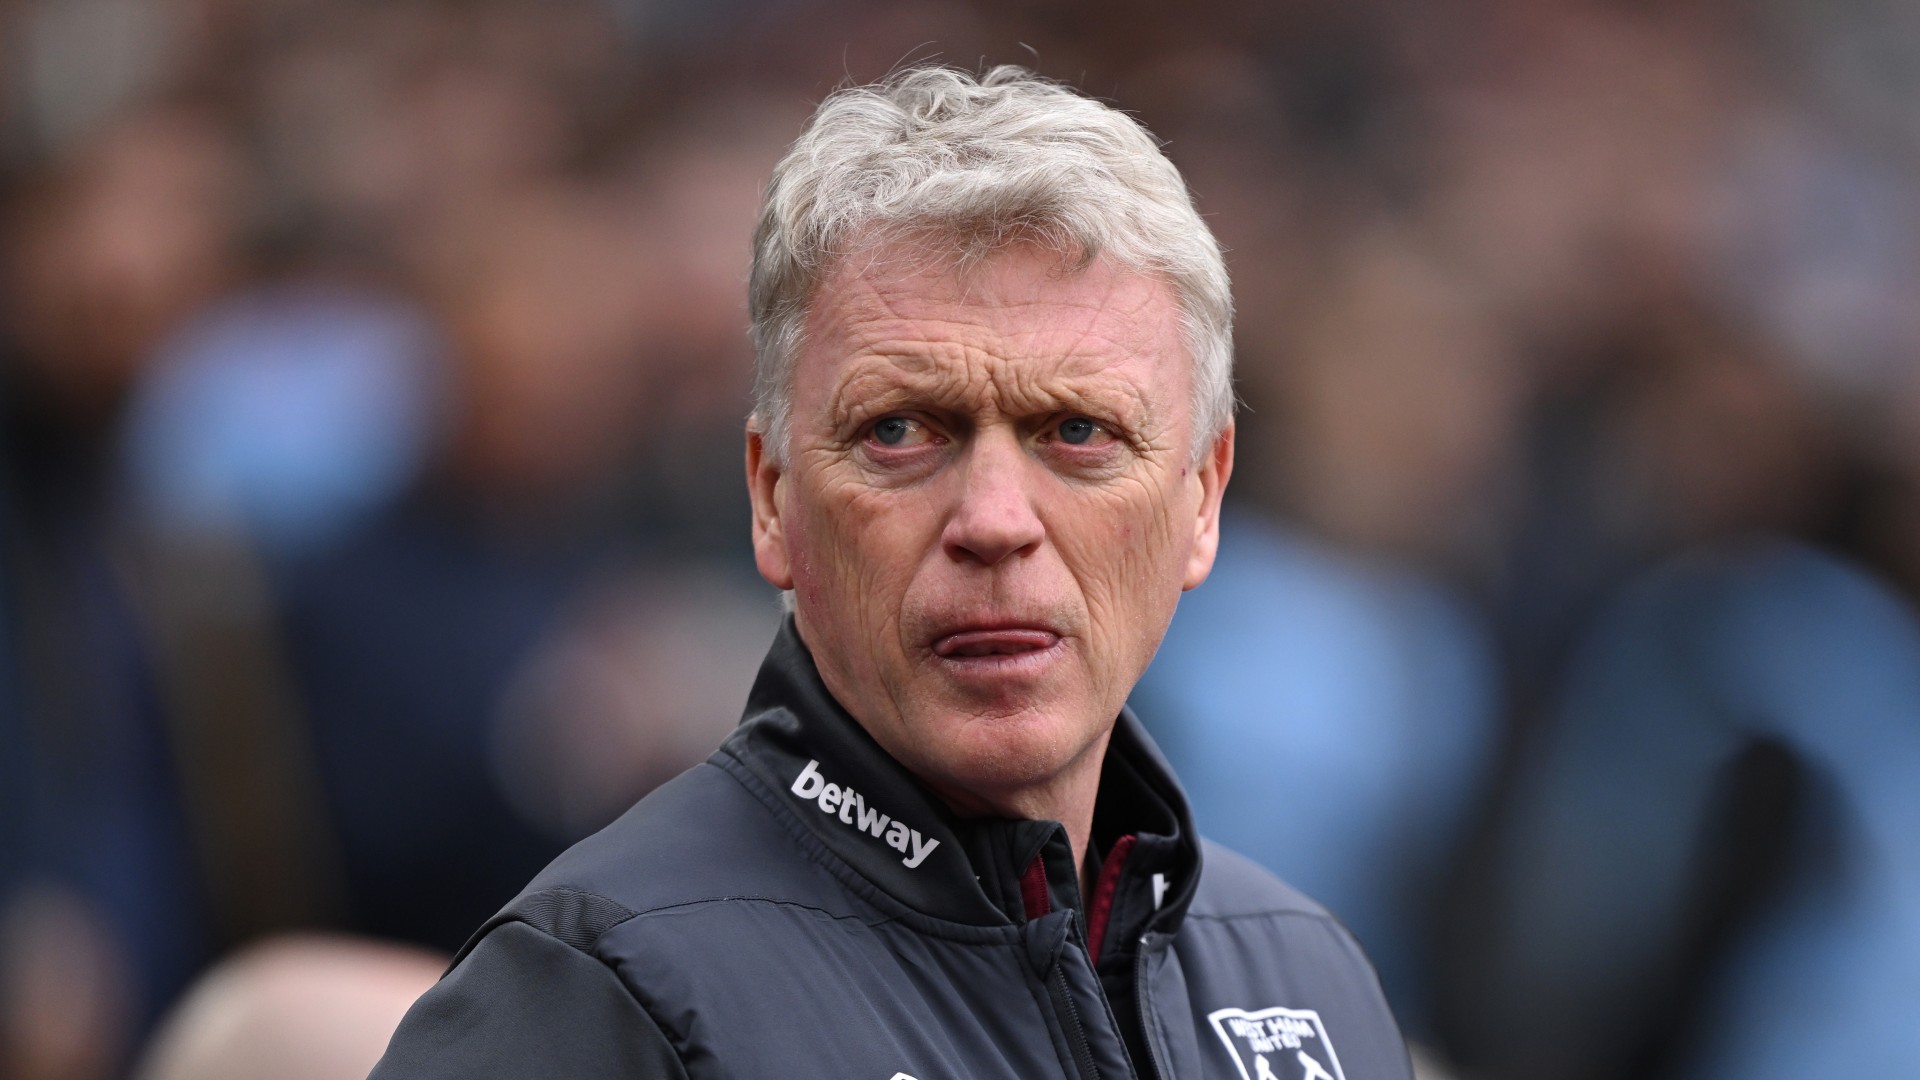 Moyes to leave West Ham